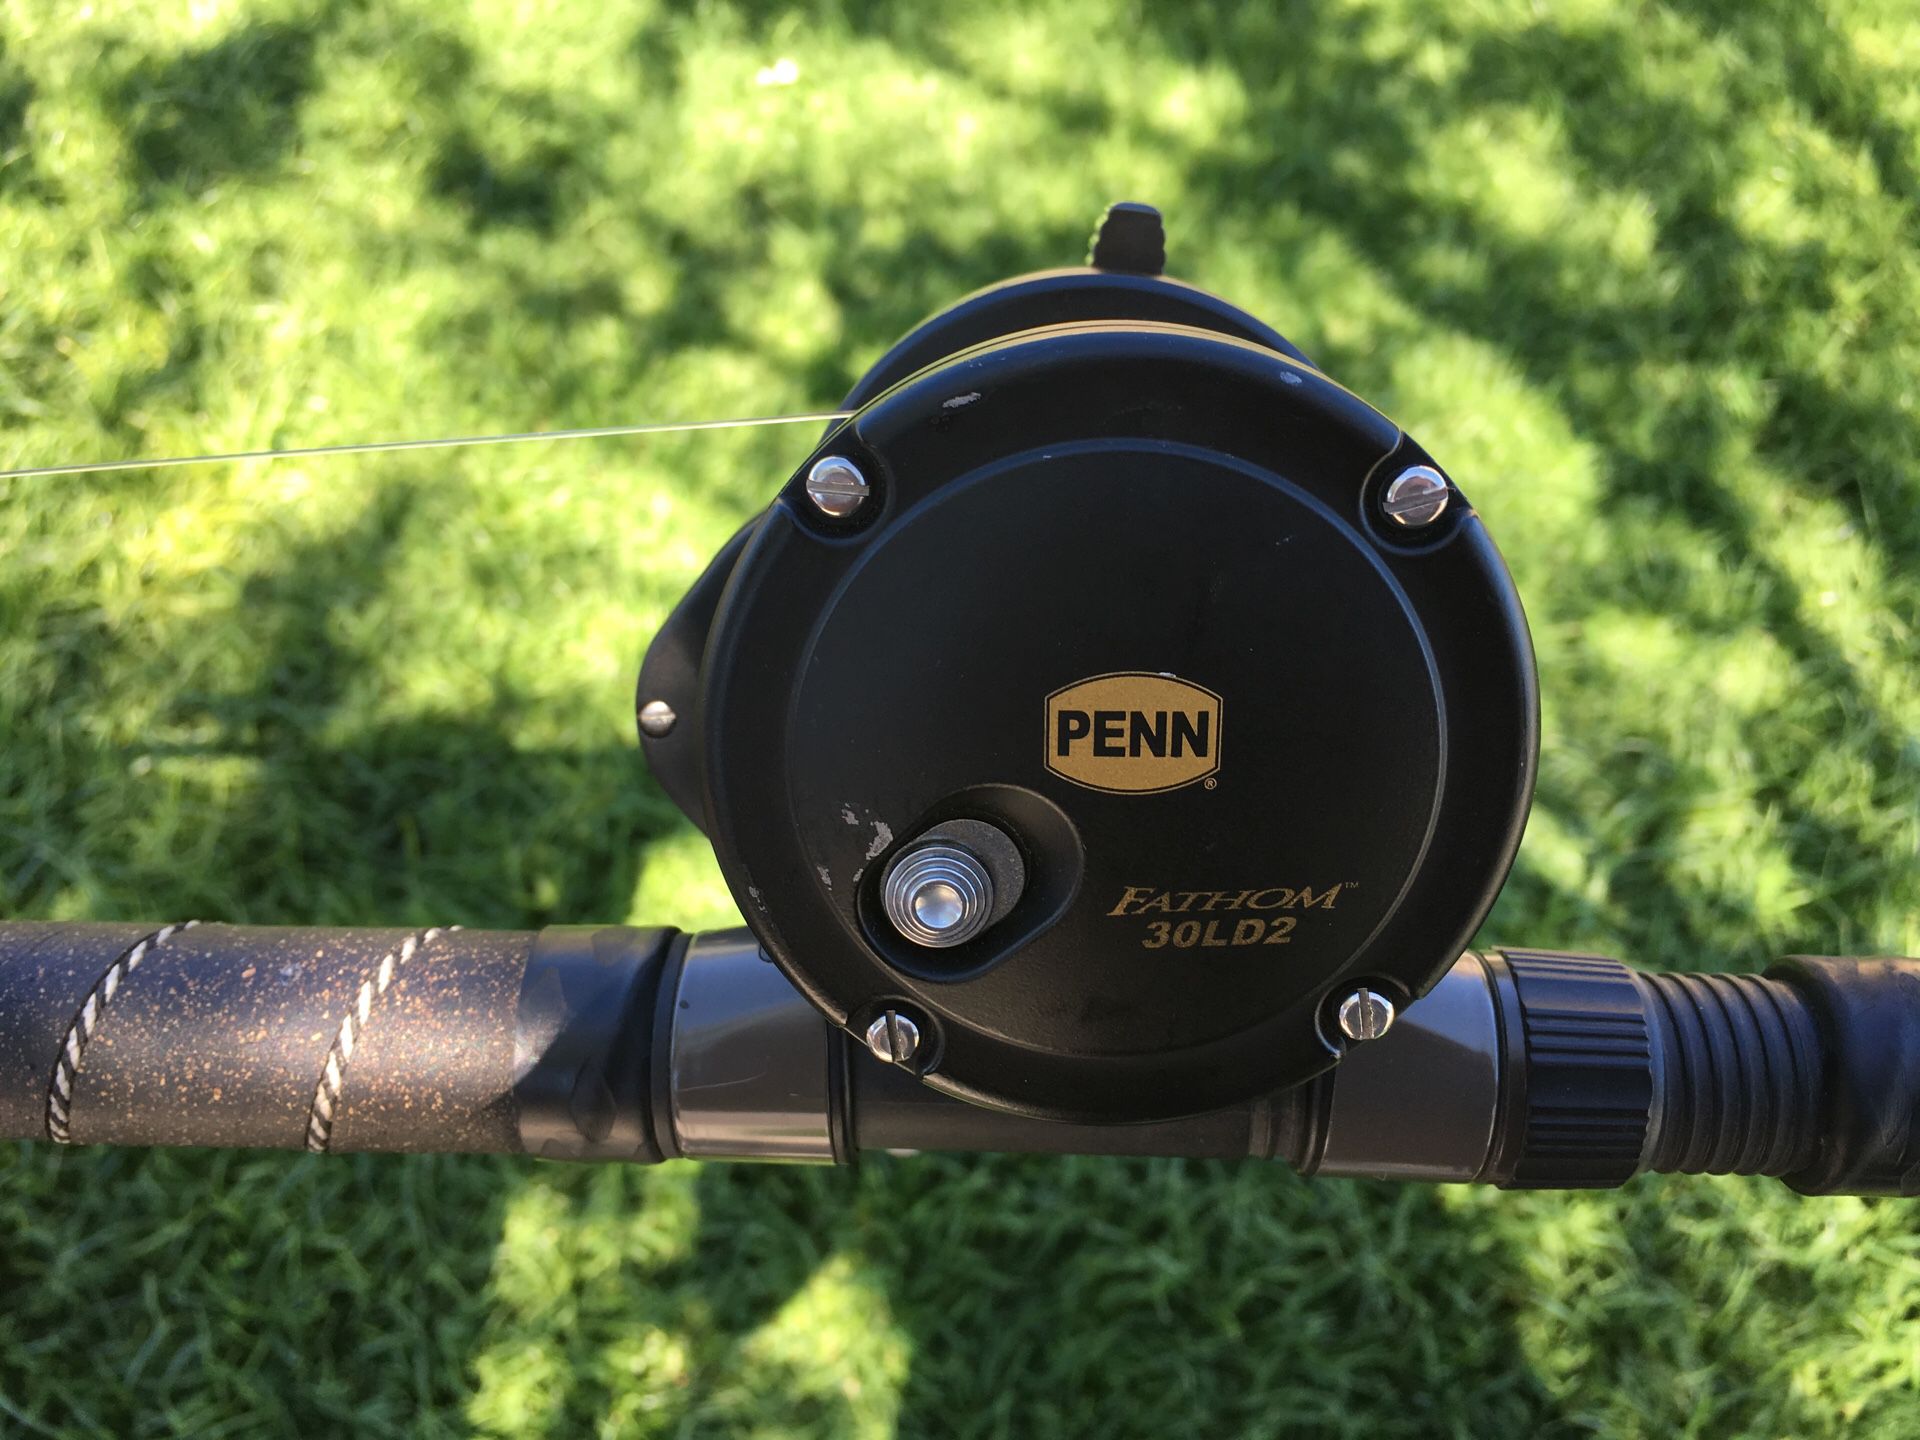 Penn fathom lever drag 2spd (30LD2) , Phenix Abyss (PSX809) for Sale in  Long Beach, CA - OfferUp